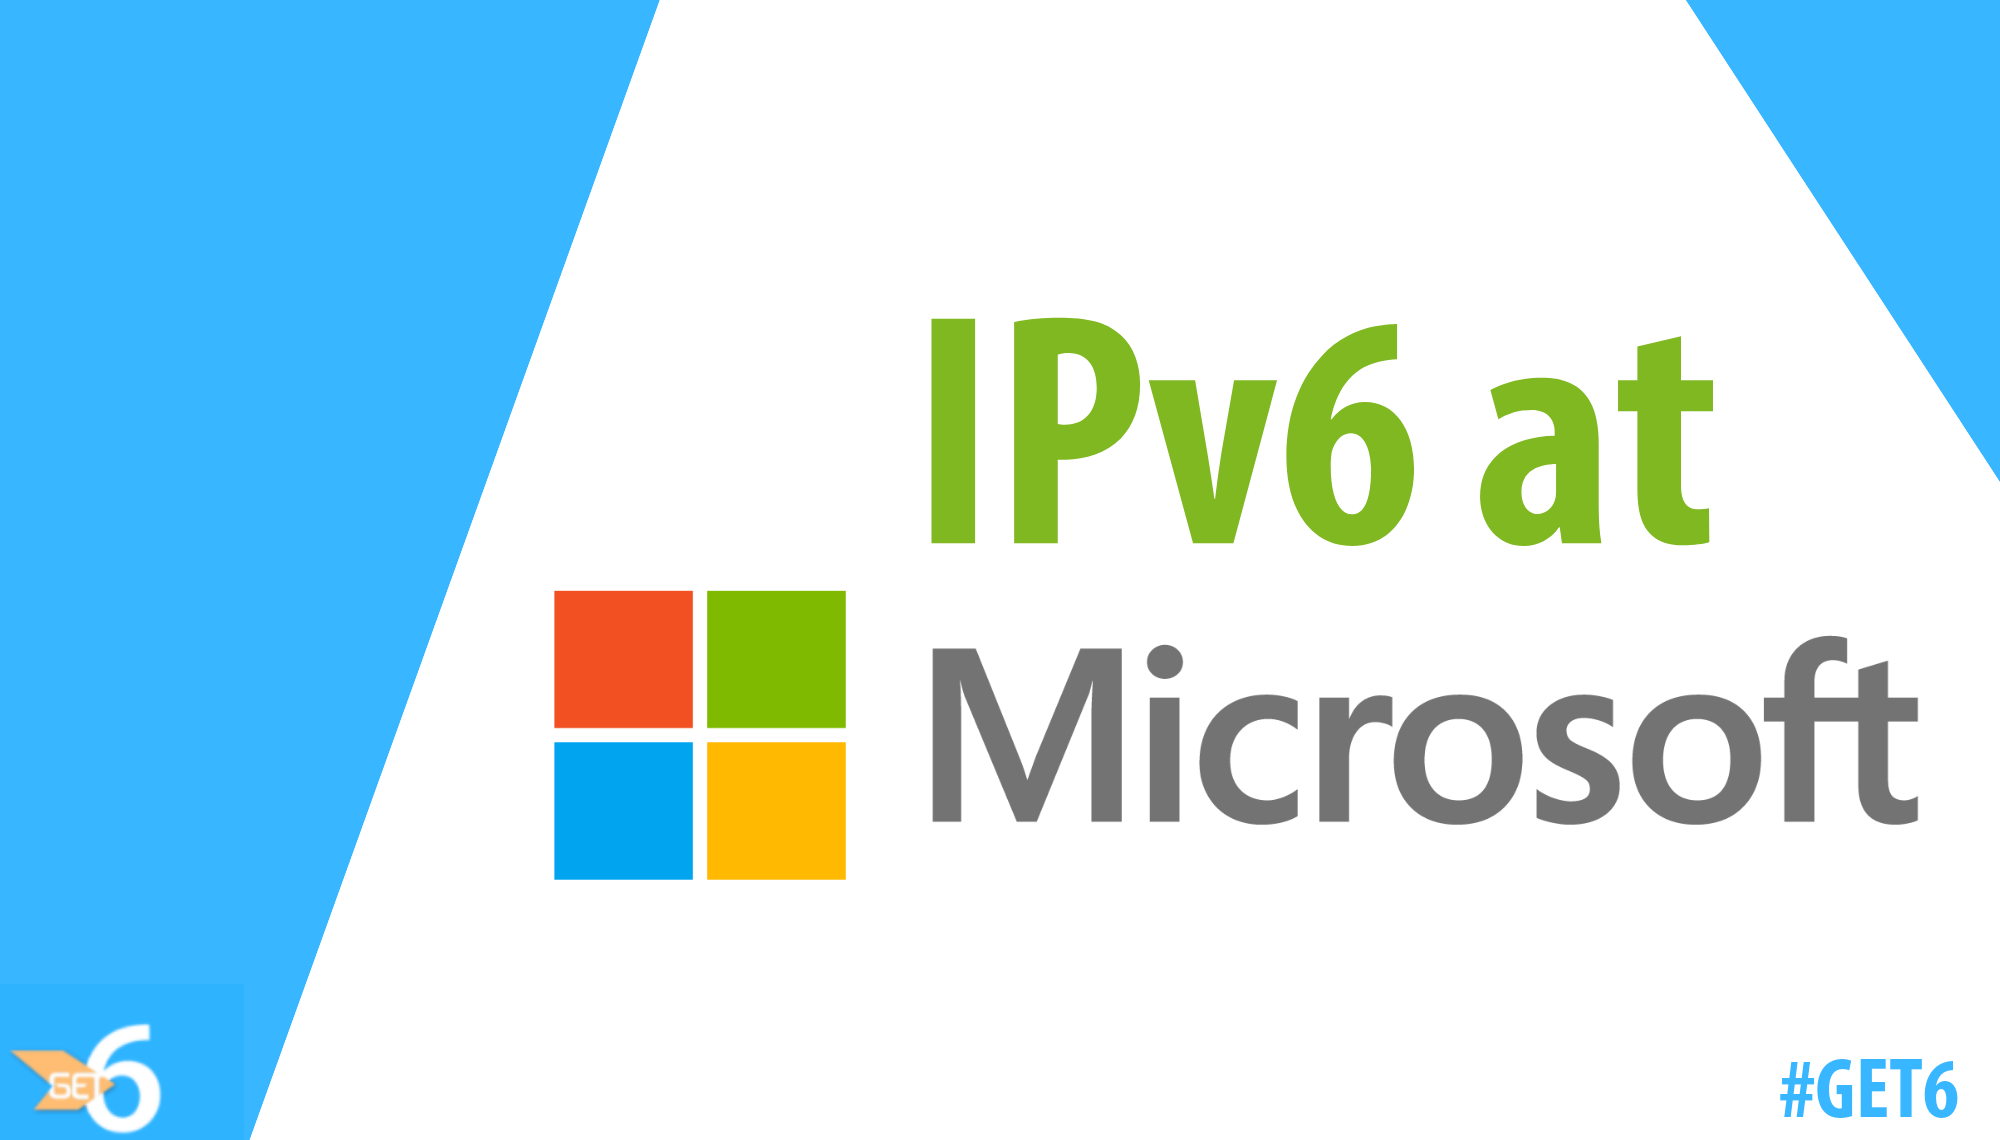 Microsoft Works Toward IPv6-only Single Stack Network